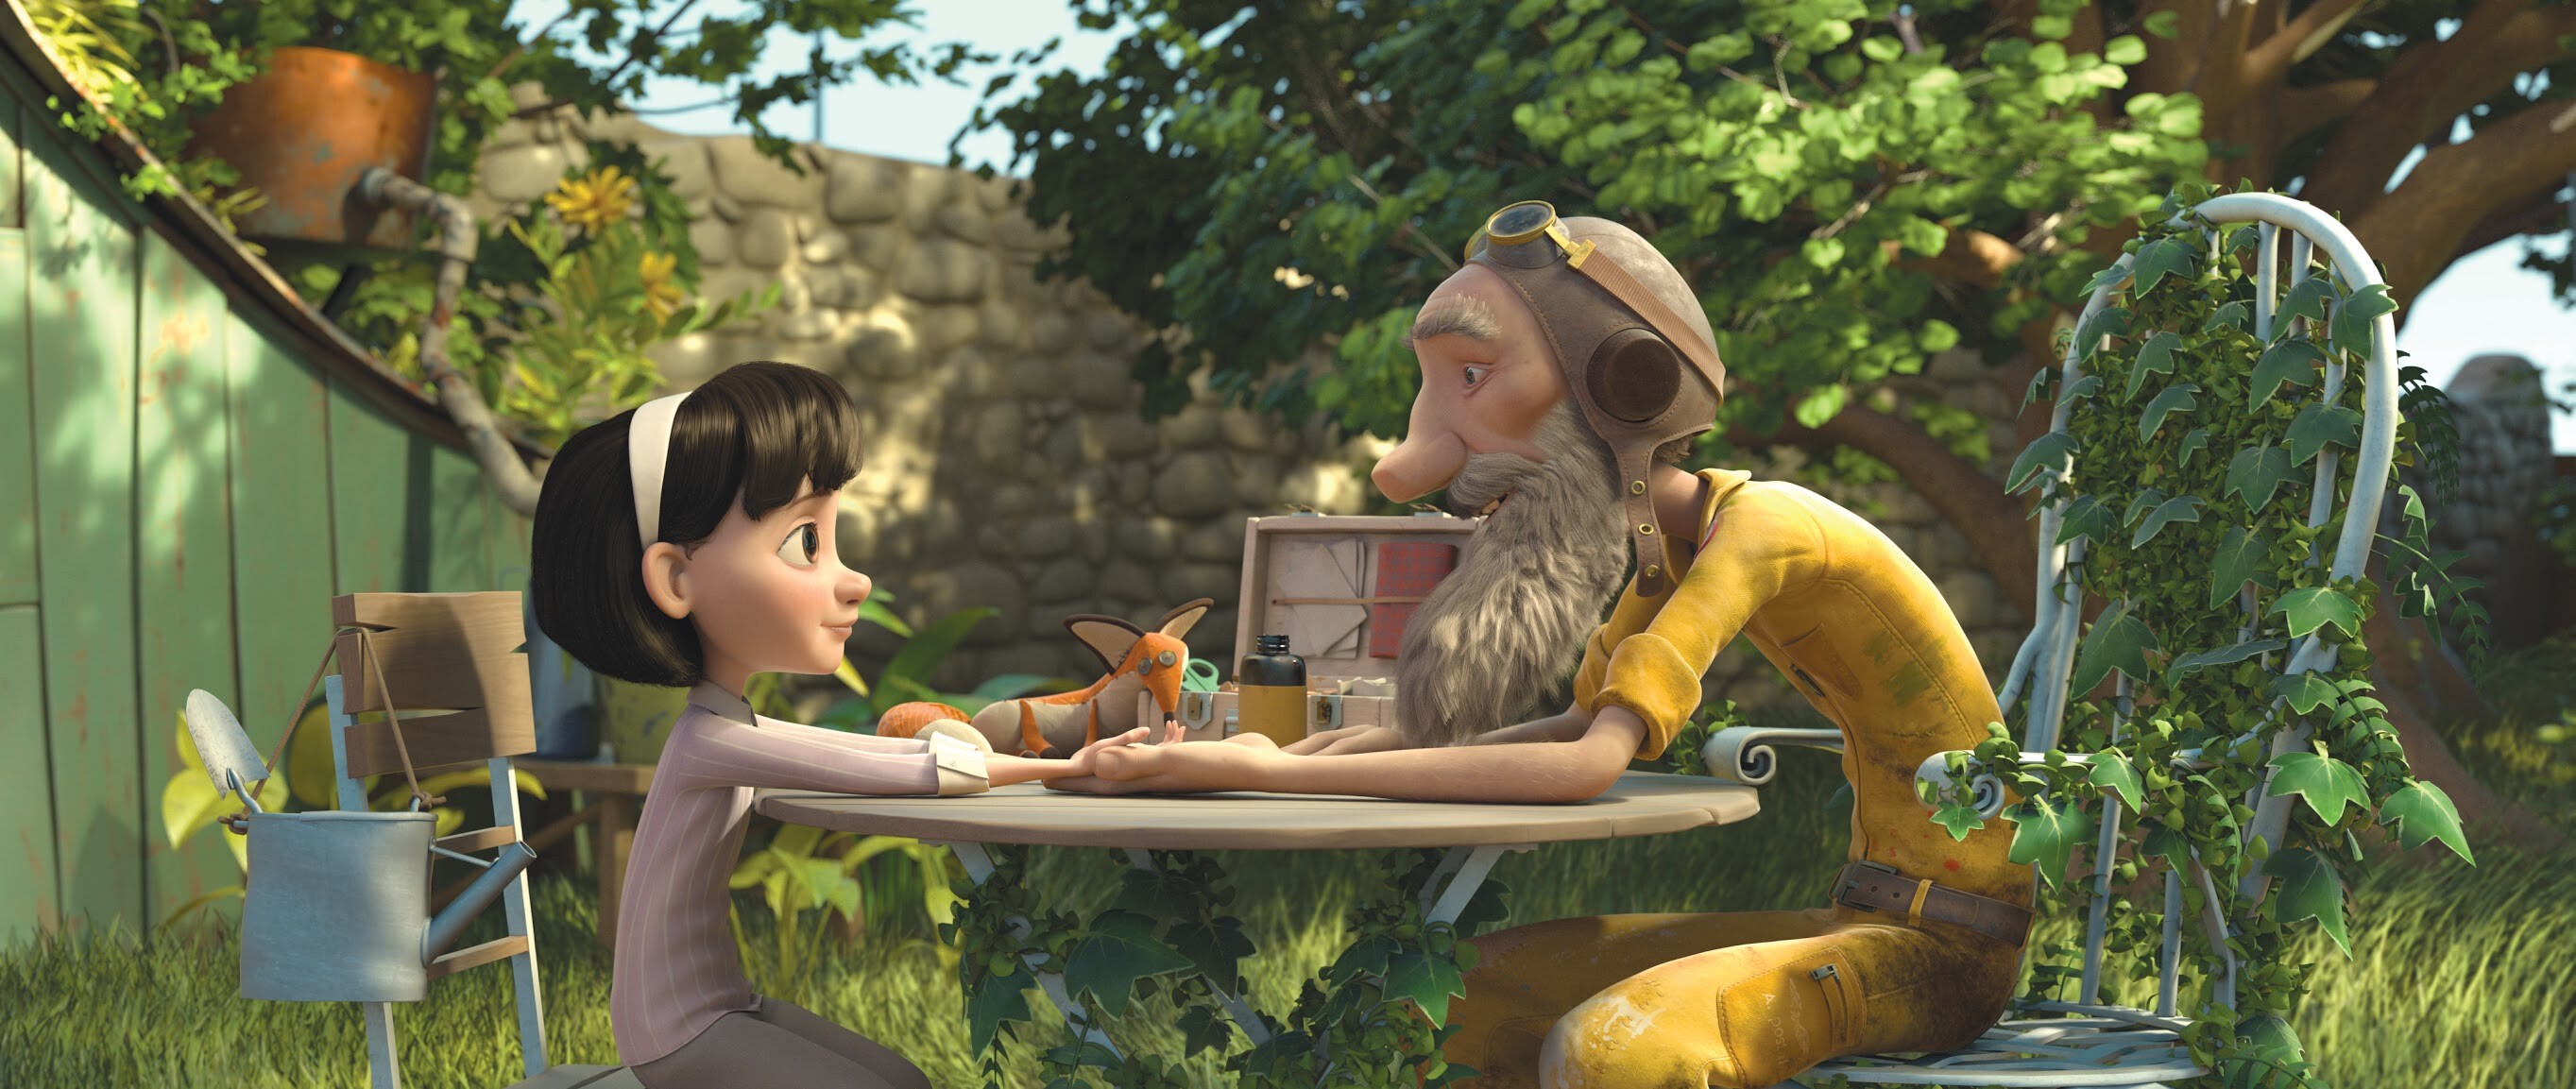 The Little Prince: After a sensational premiere during the Cannes Film Festival 2015 as part of the Official Selection, it has played around the world in more than 60 territories. 2730x1160 Dual Screen Wallpaper.